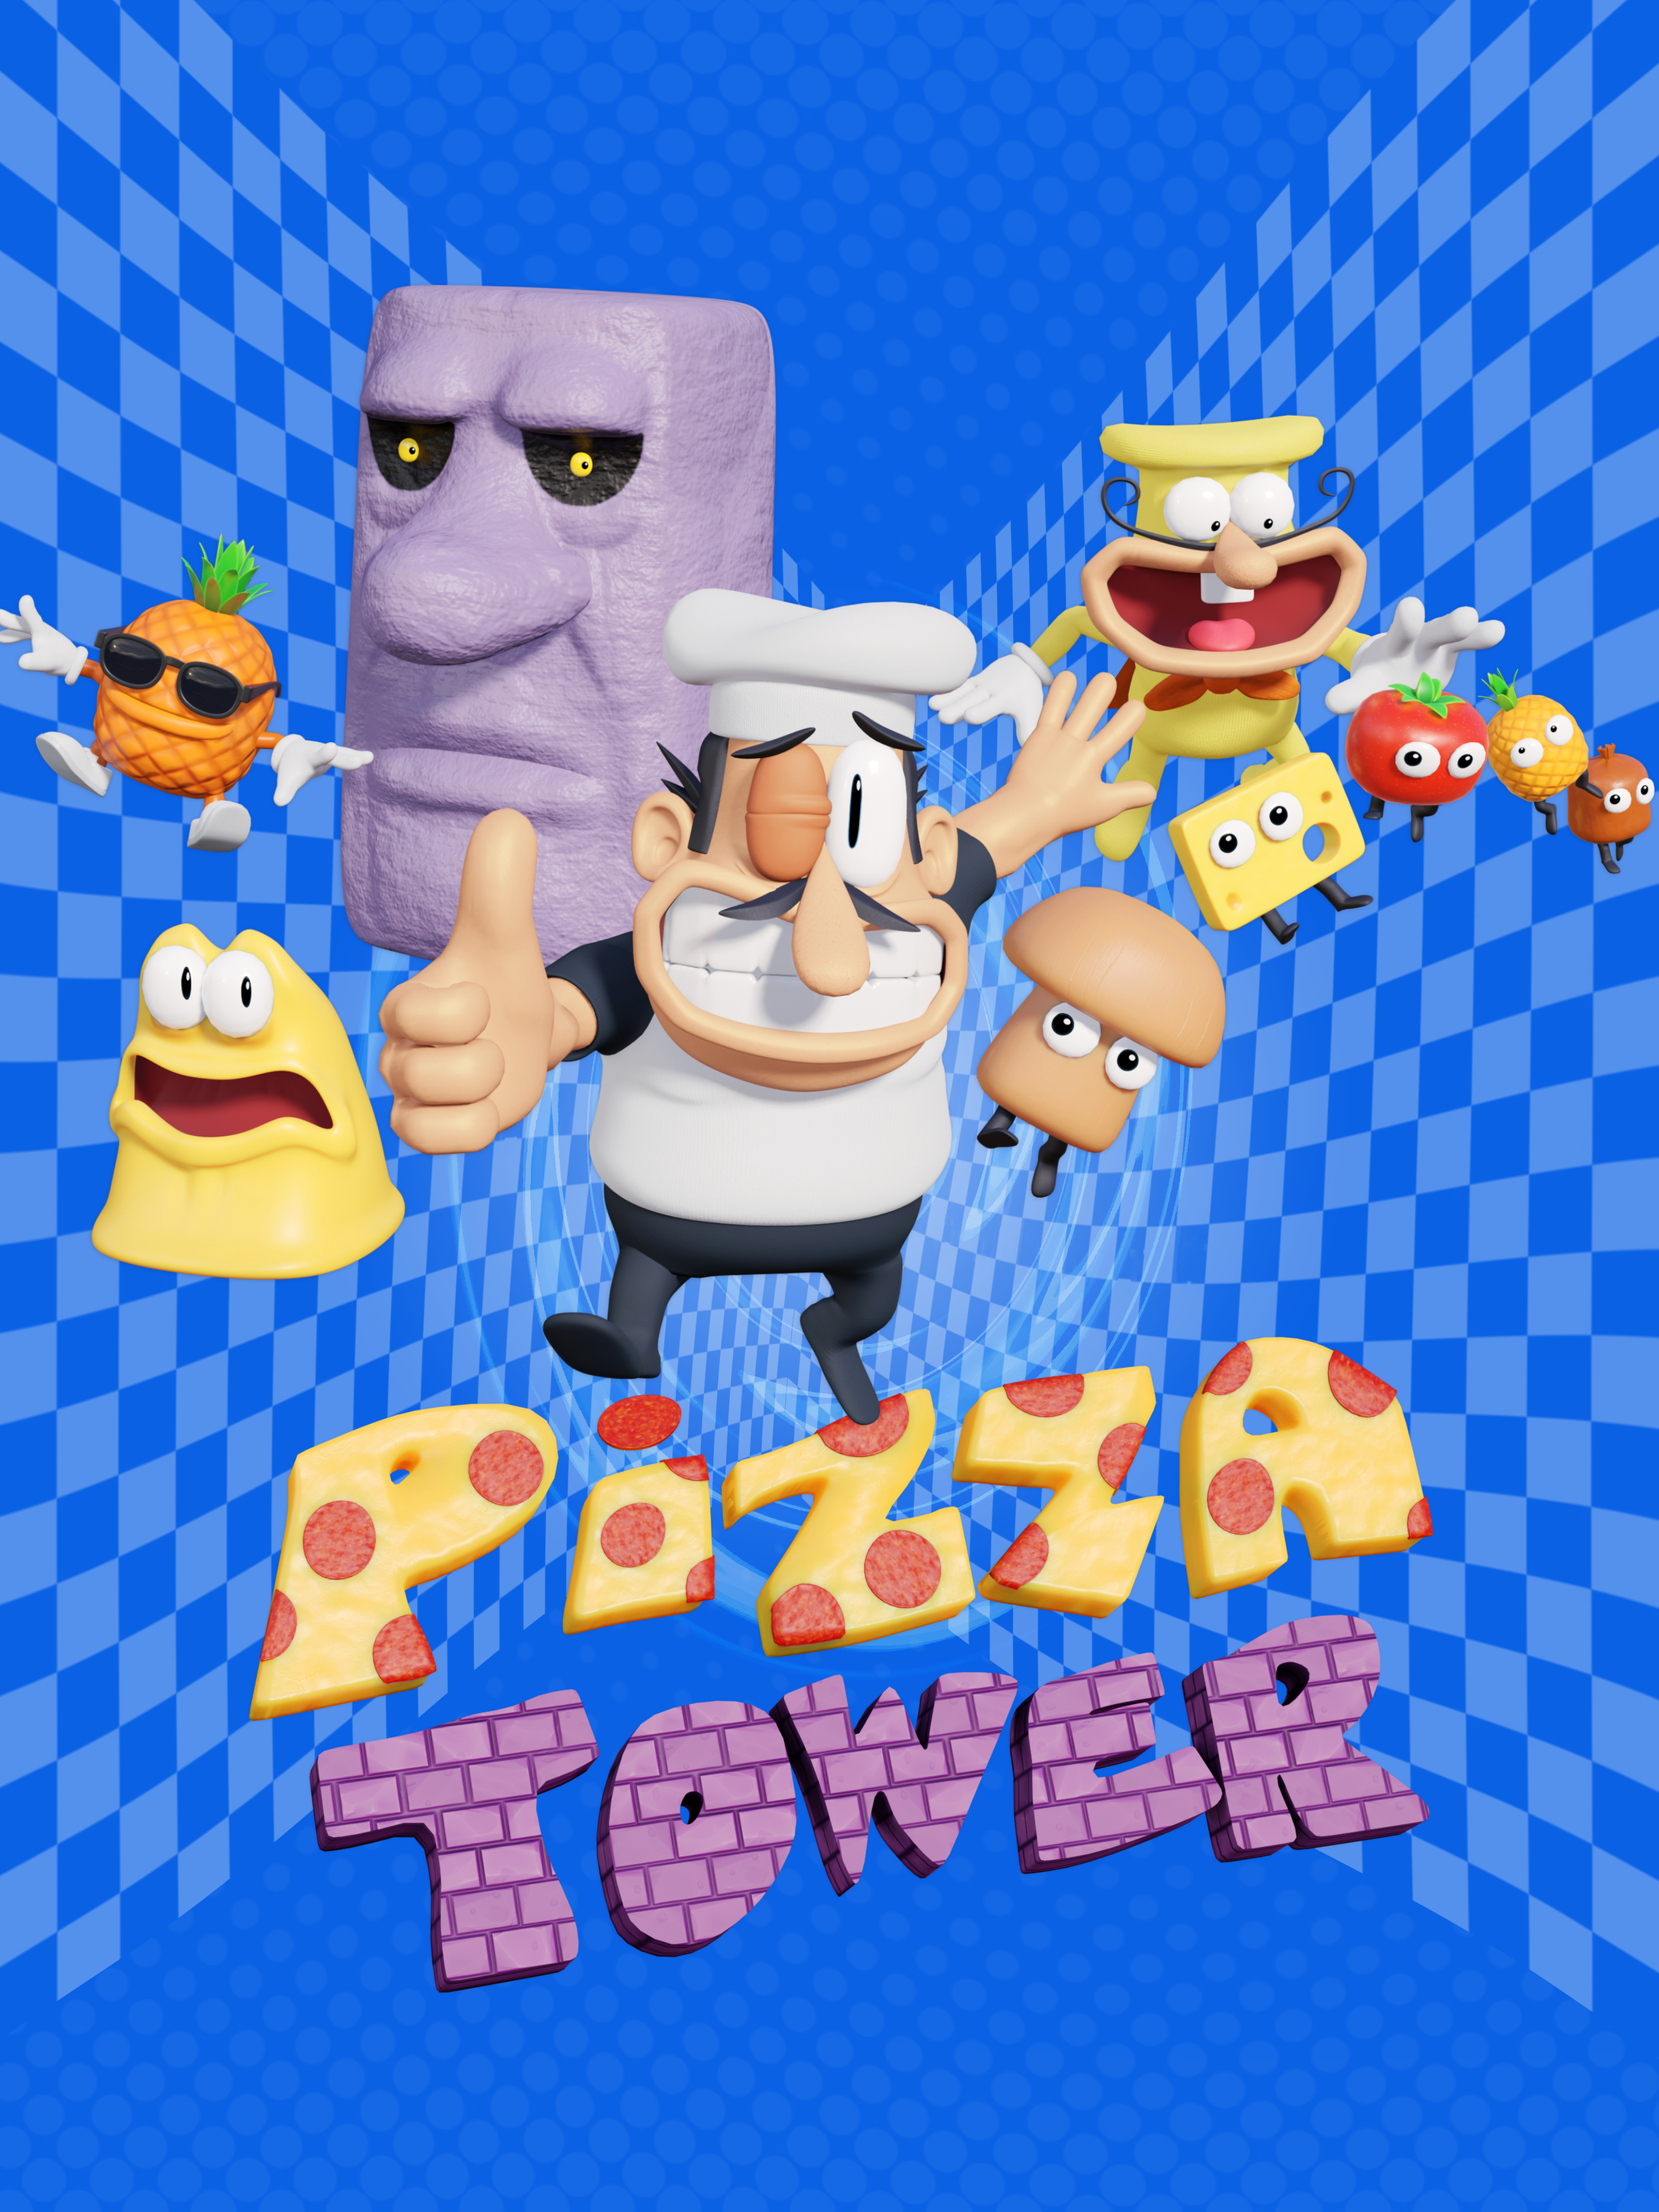 Pizza Tower Poster and Wallpaper .reddit.com